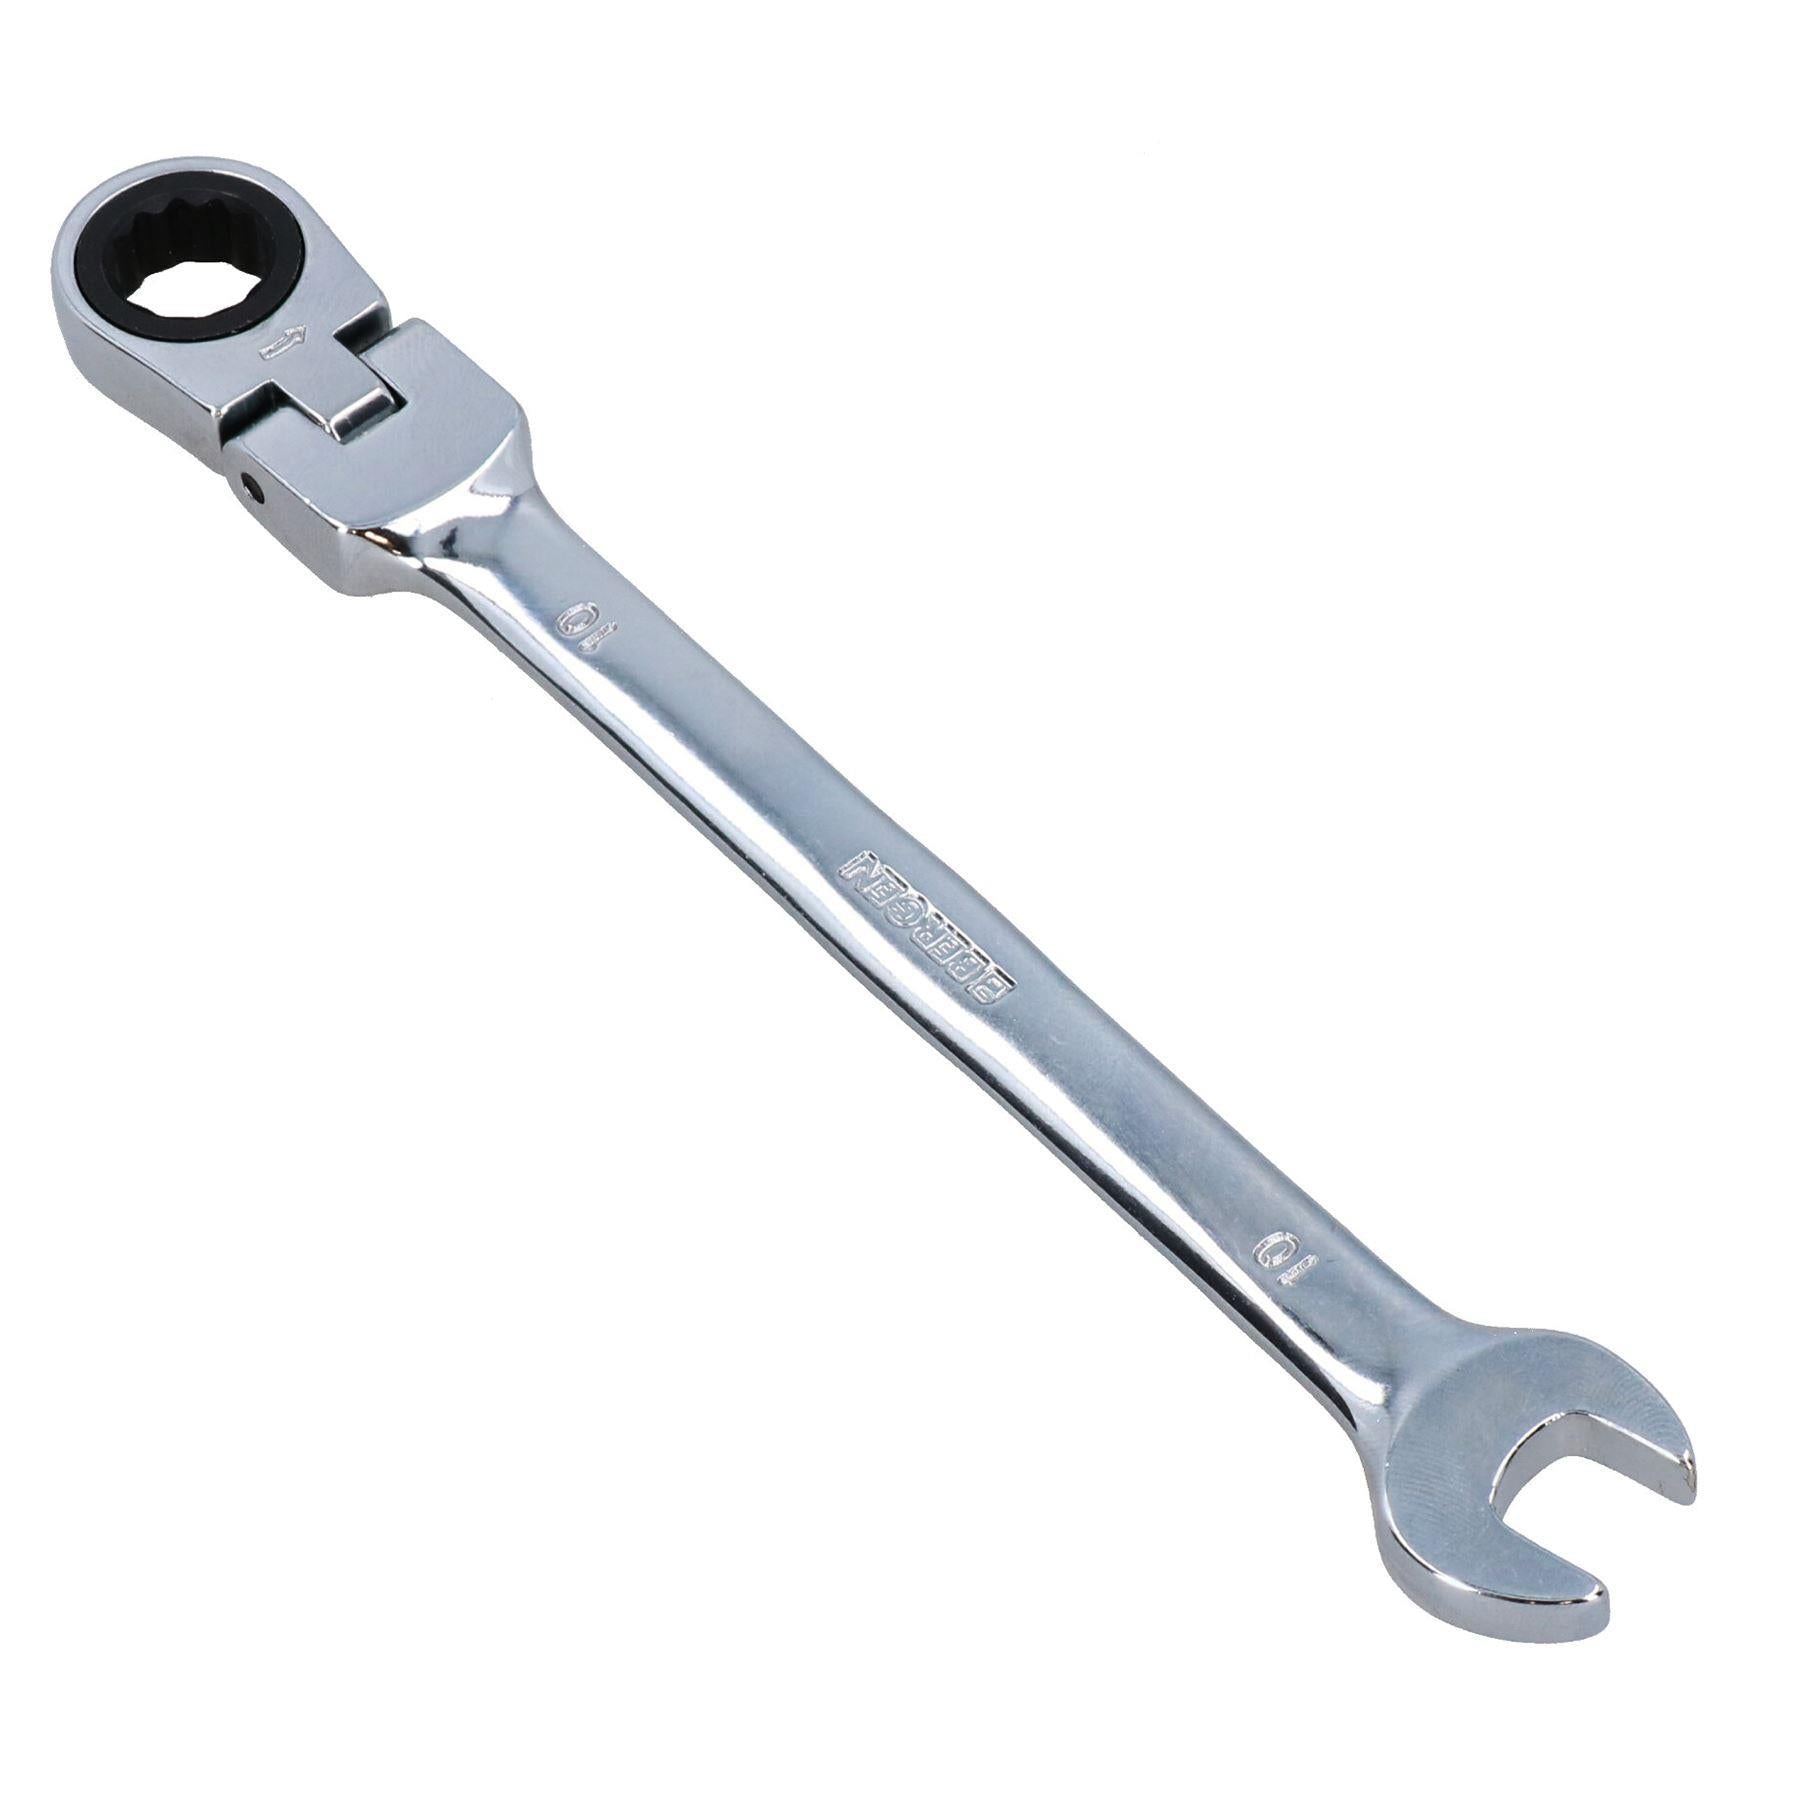 Individual Metric Flexi Ratchet Spanners 8mm - 19mm Sizes